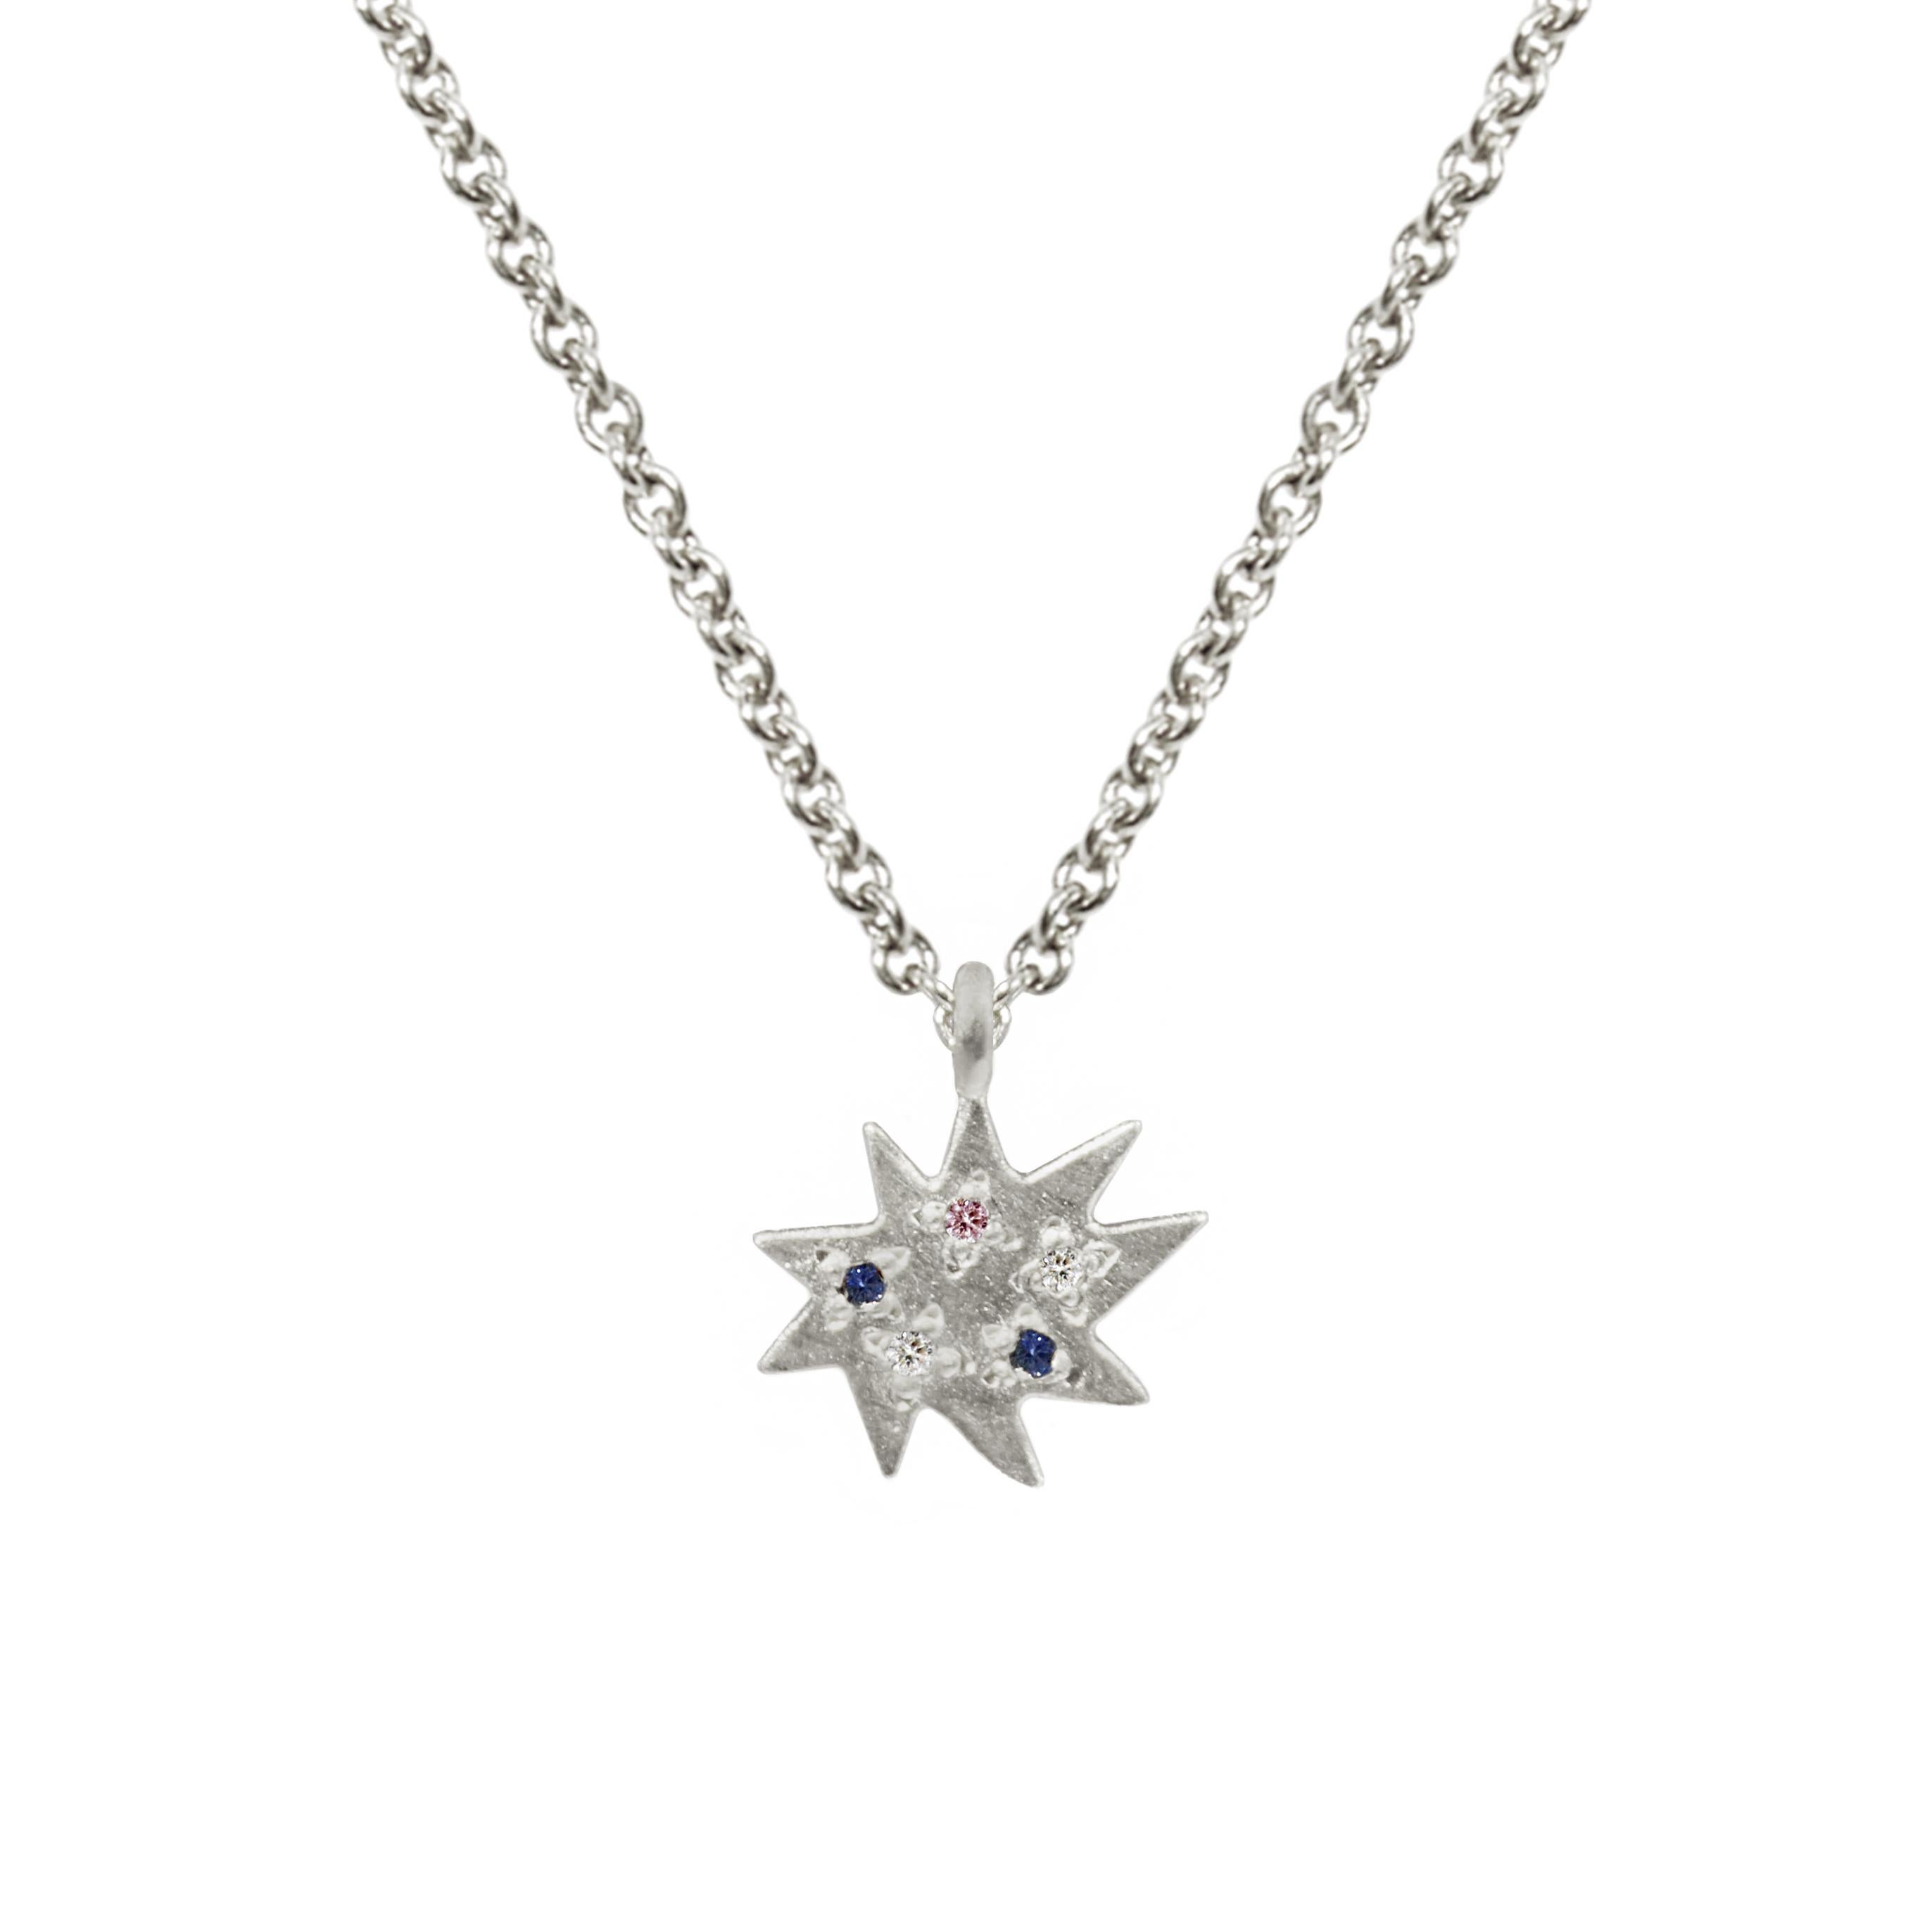 Emily Kuvin Mini Stella Silver and Amethyst Star Dainty Layering Necklace 1